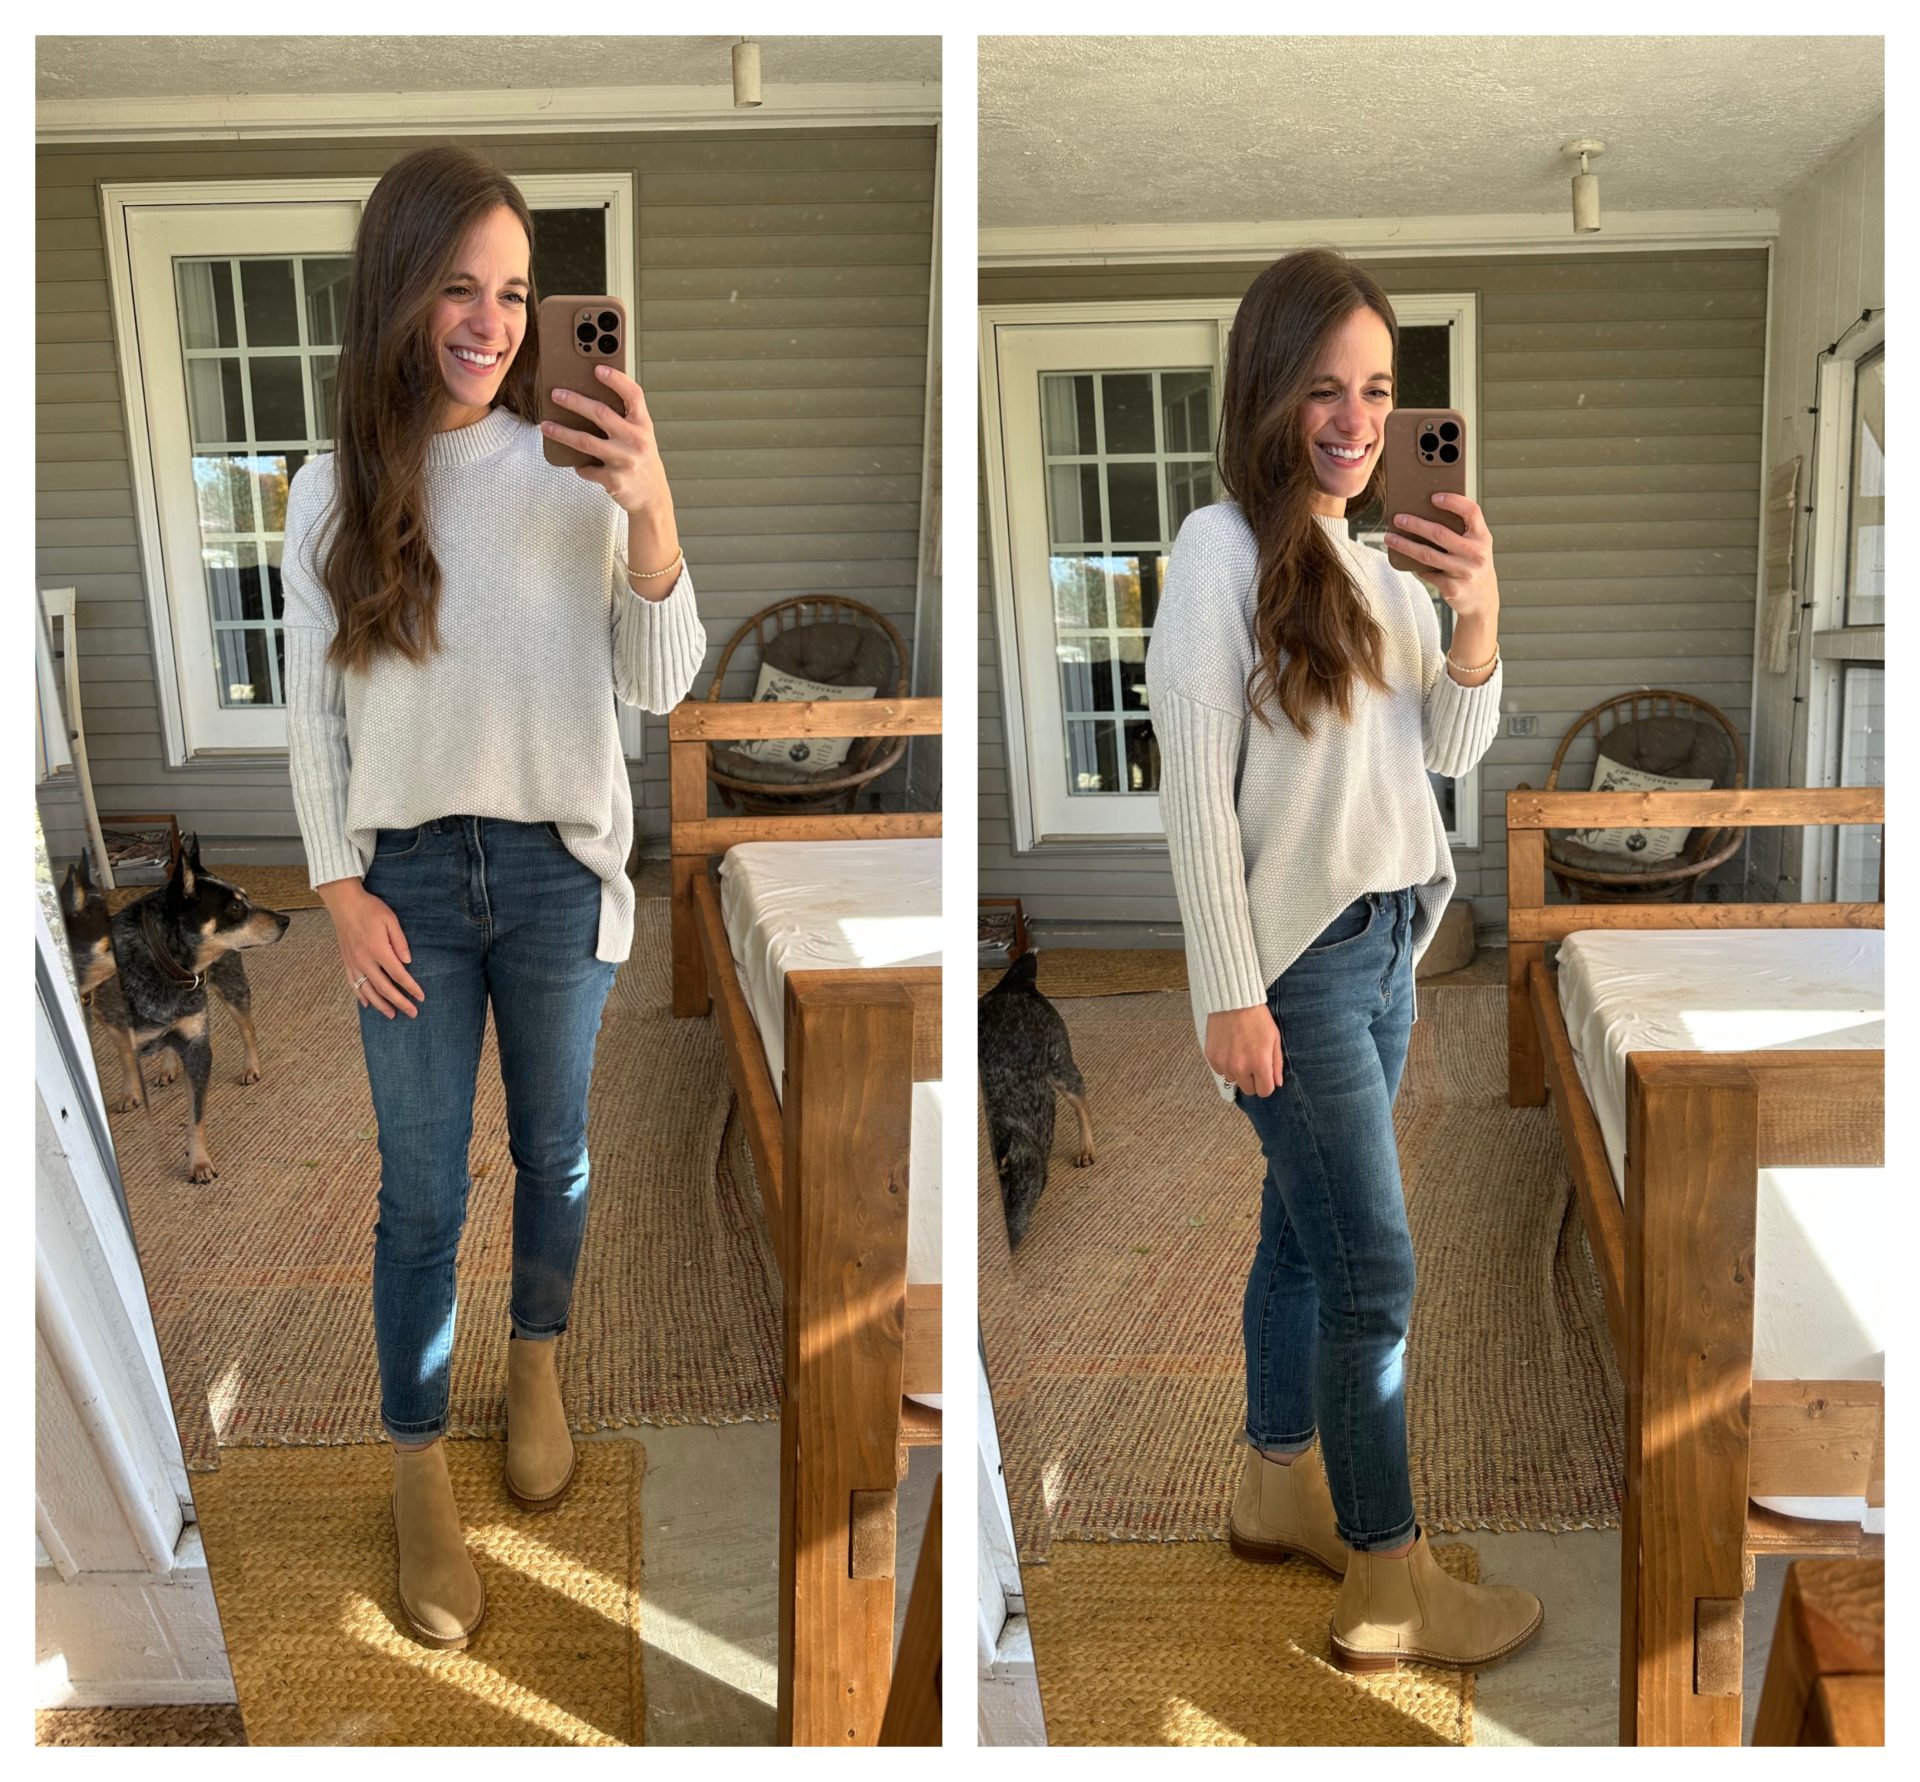 Spanx Leggings Outfit Idea & Prime Day Purchases - B Loved Boston